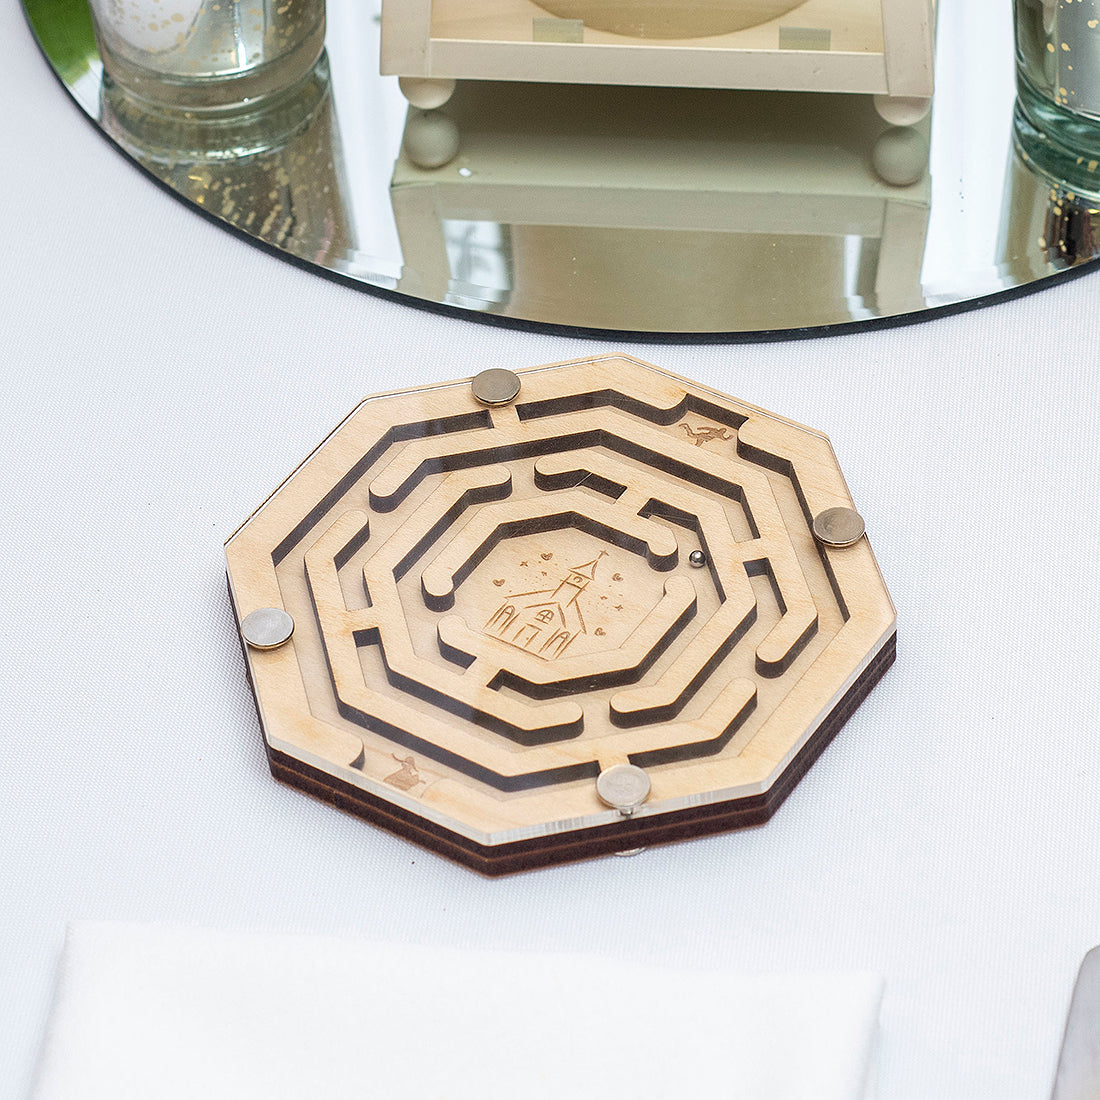 Wedding Labyrinth Tilting Maze Game with Ball Guest Favour Puzzle-Weddings by Lumi